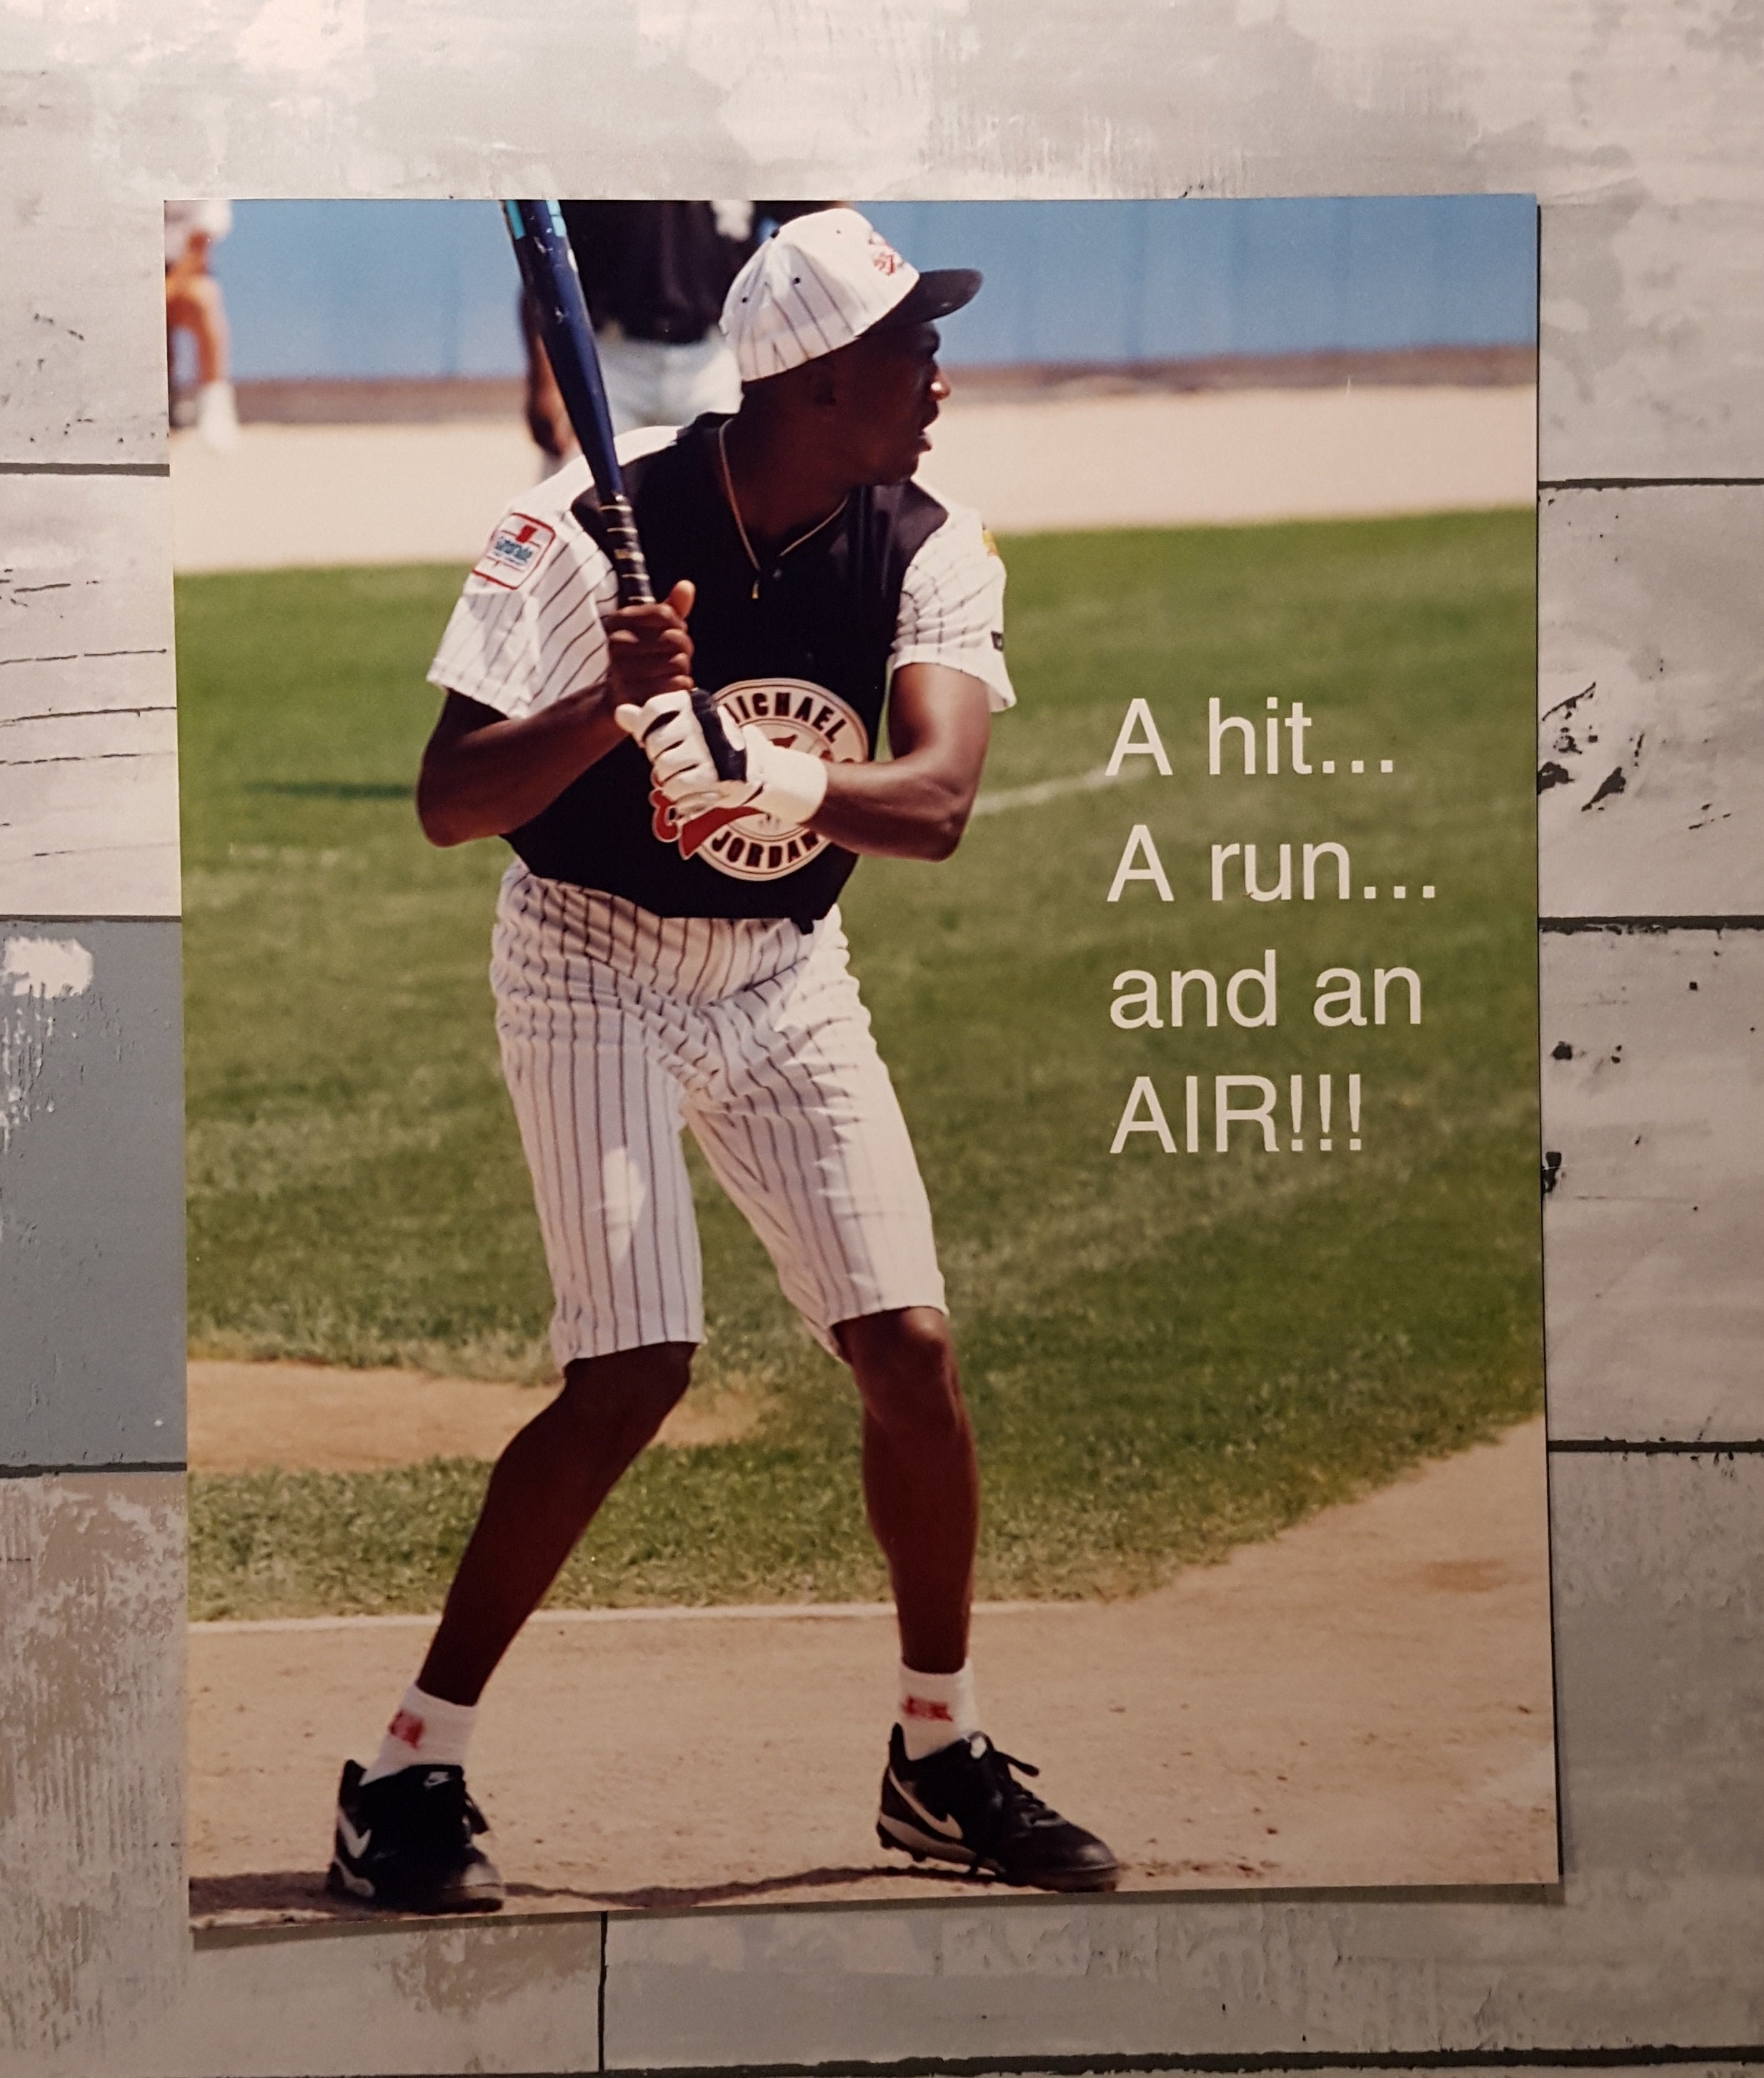 Baseball In Pics on X: Michael Jordan playing with the Chicago White Sox,  1993. What is your opinion on Jordan trying to play baseball?   / X